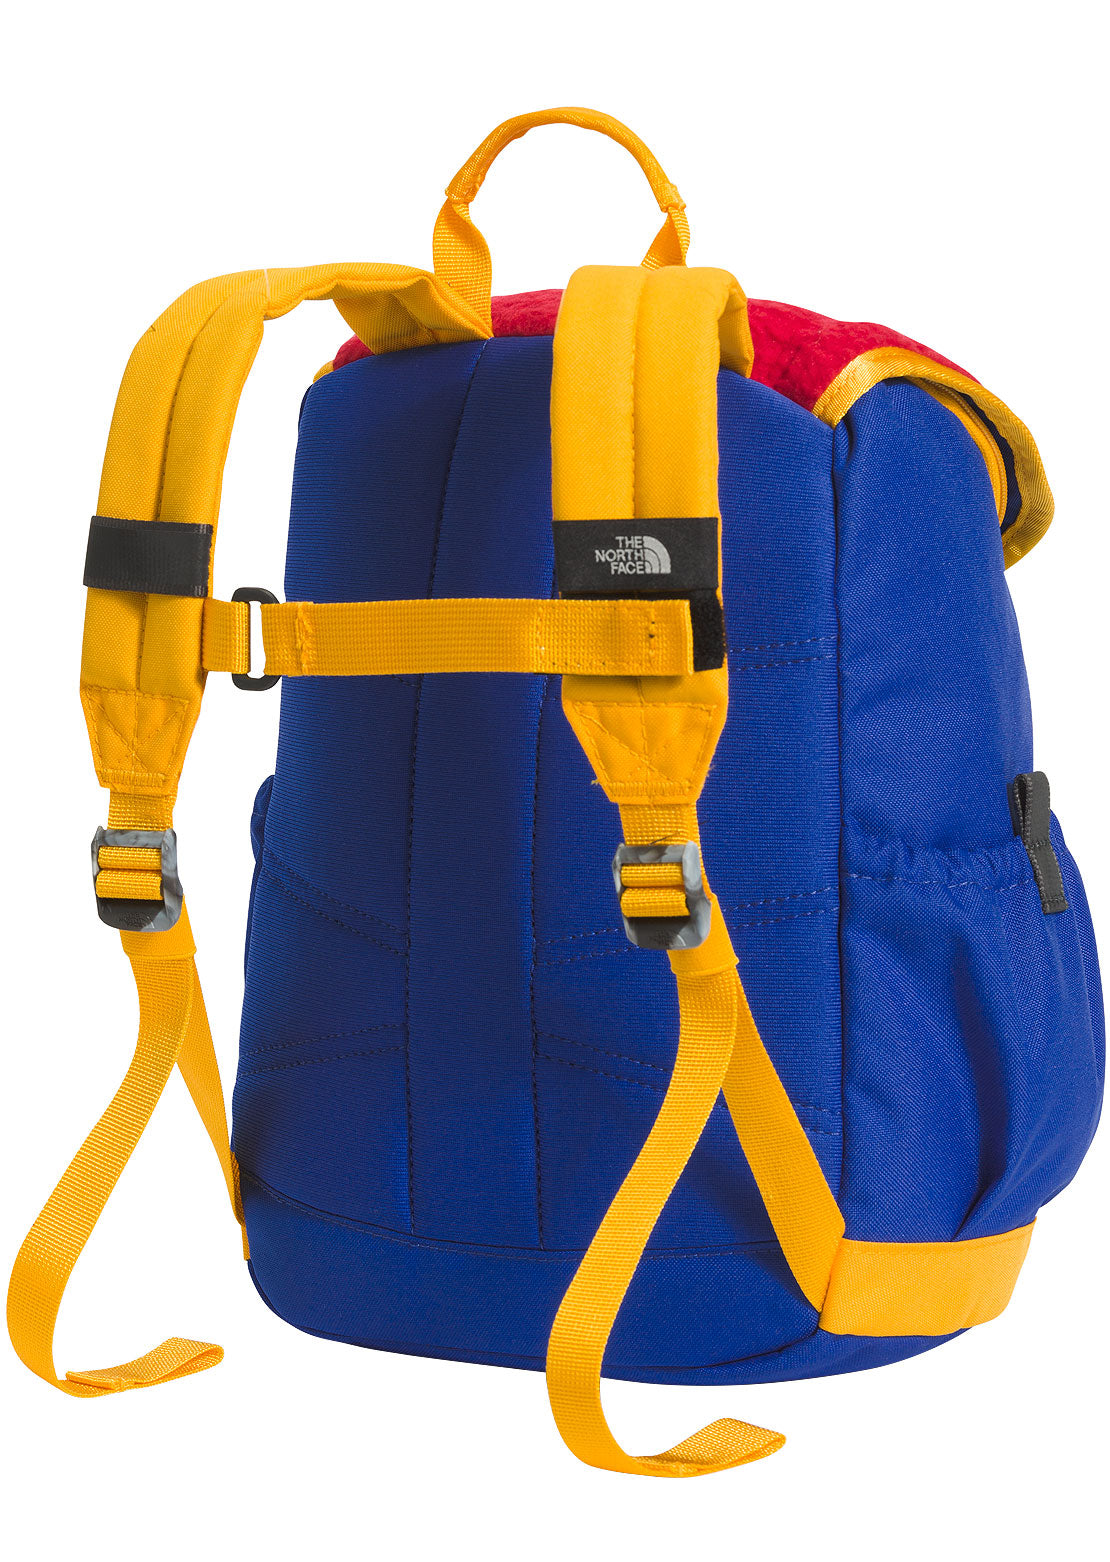 The North Face - Sac A Dos Borealis Classic Rouge 